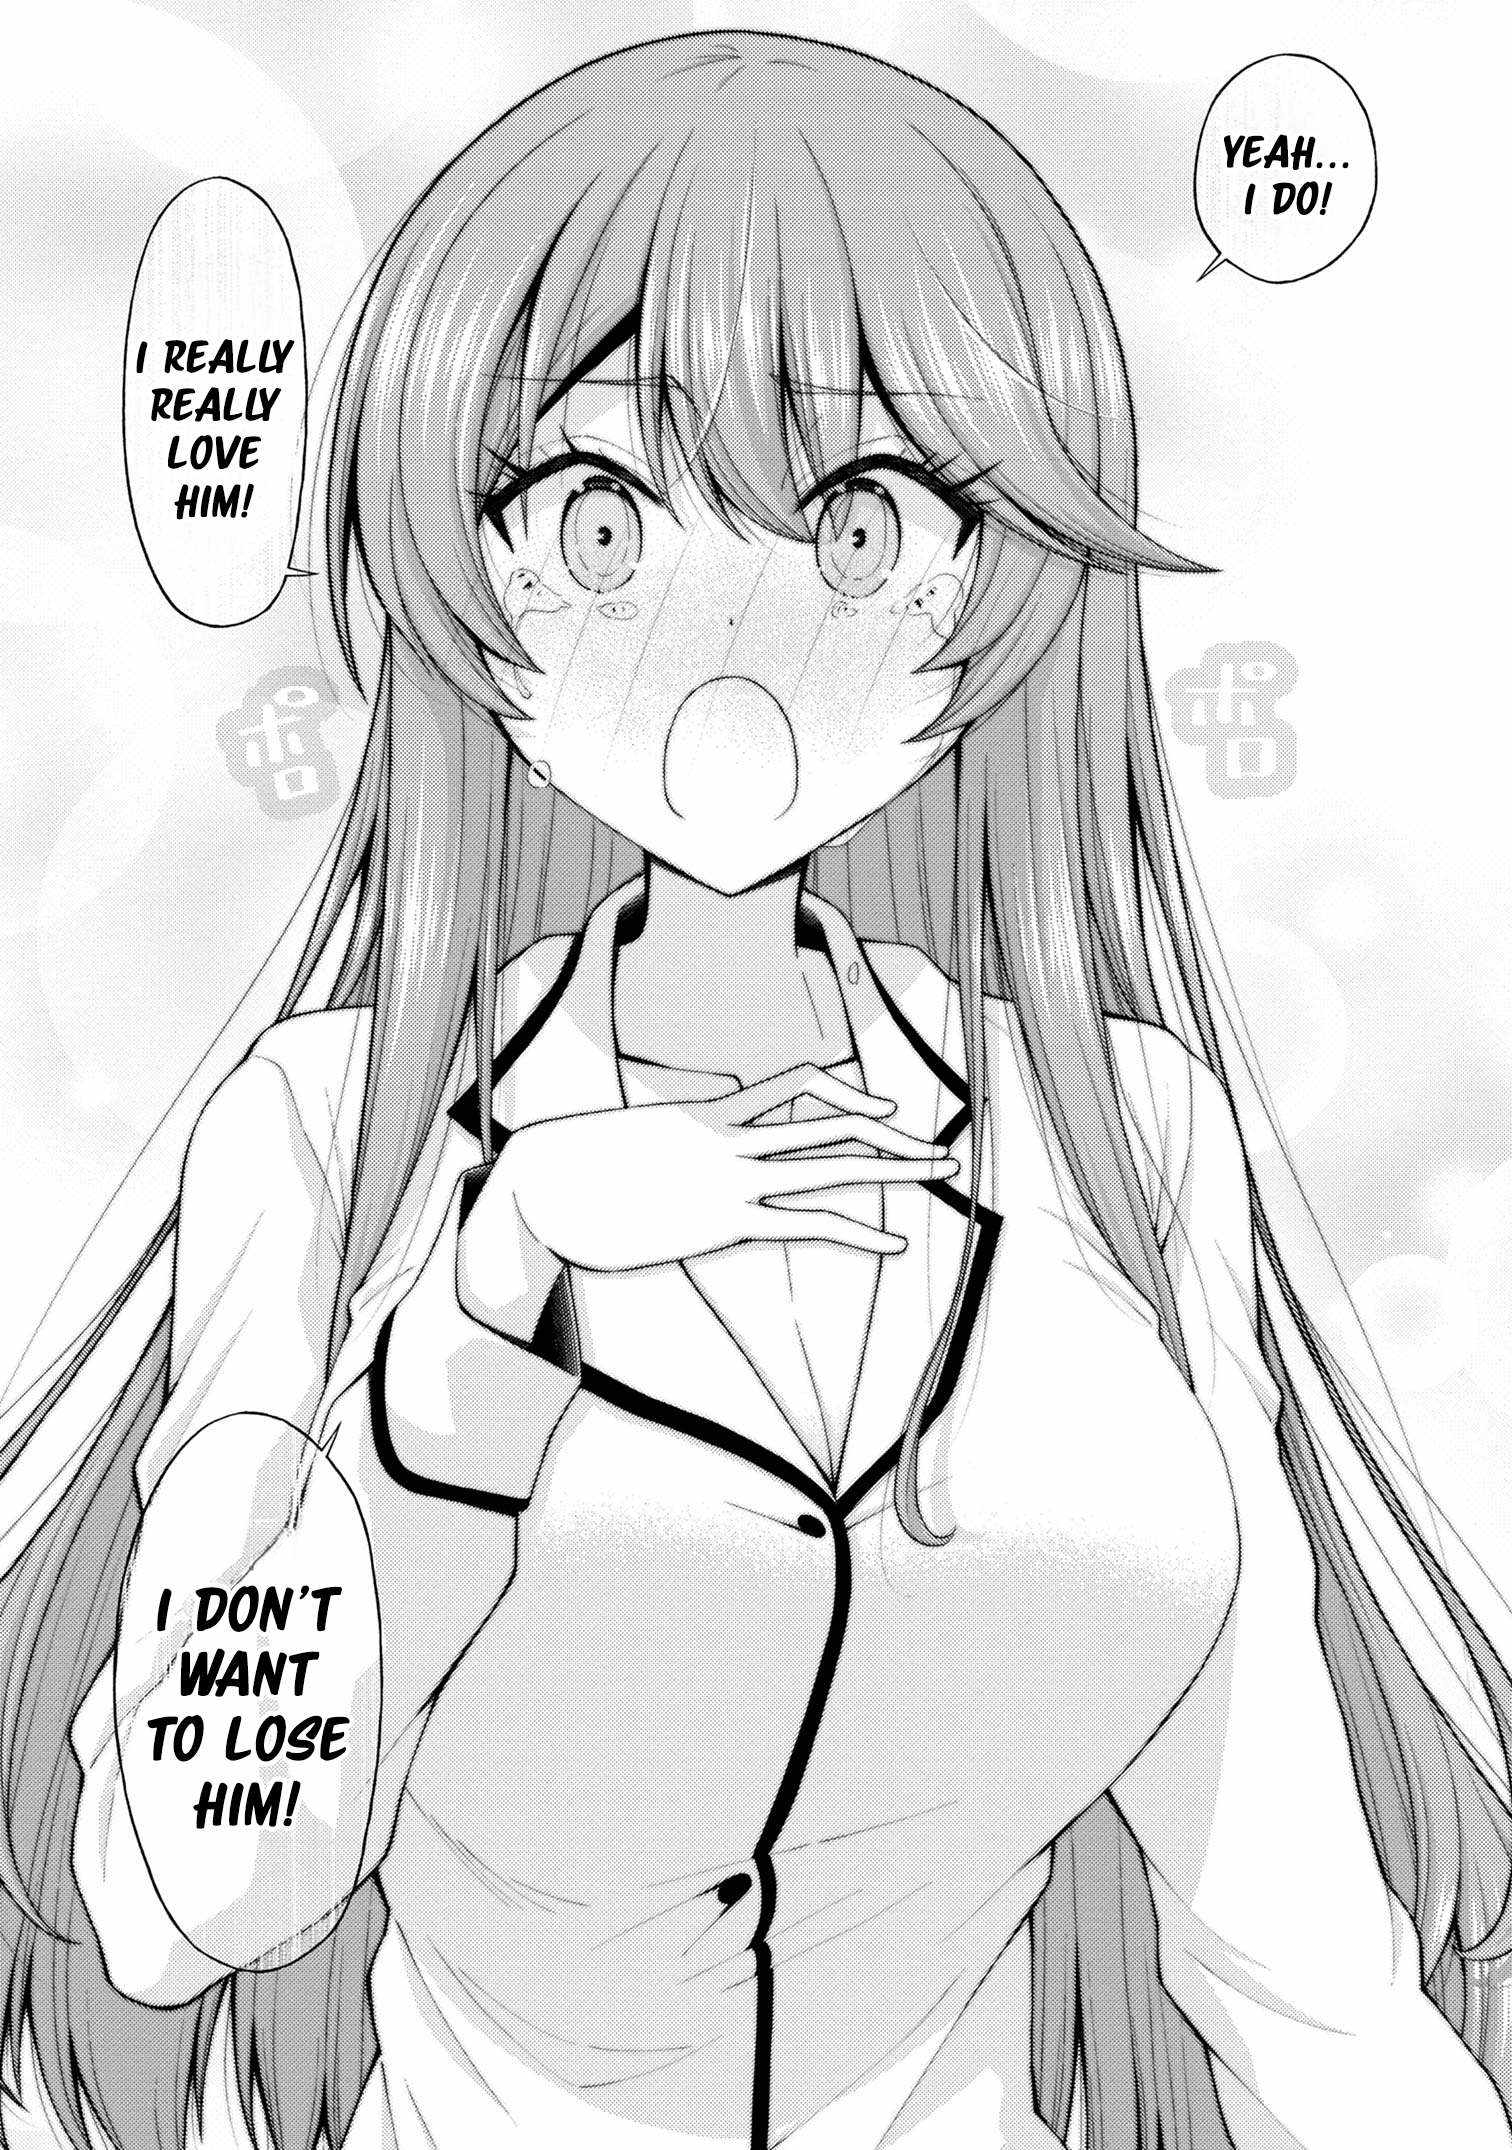 The Gal Who Was Meant to Confess to Me as a Game Punishment Has Apparently Fallen in Love with Me Chapter 12-5-eng-li - Page 19